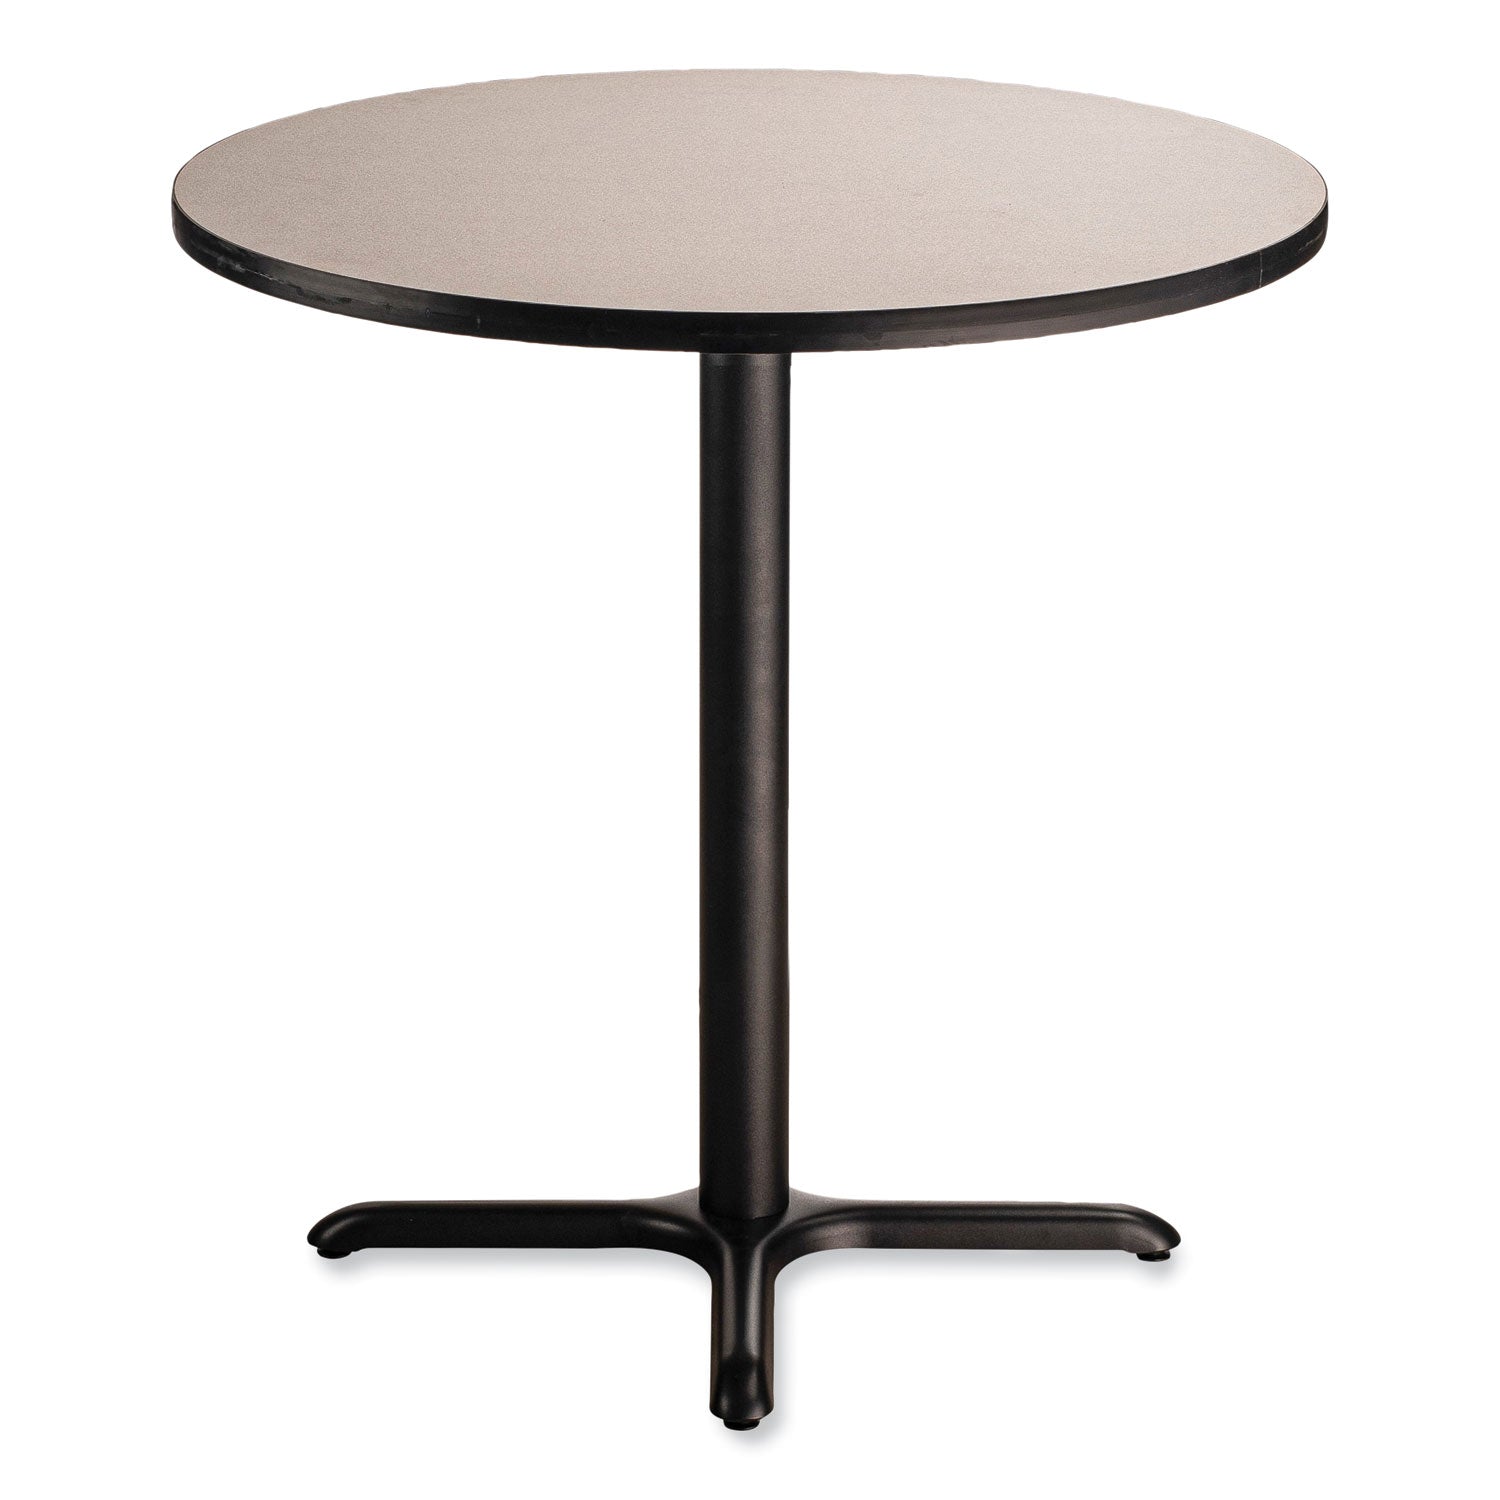 cafe-table-36-diameter-x-36h-round-top-x-base-gray-nebula-top-black-base-ships-in-7-10-business-days_npsct13636xc1gy - 2